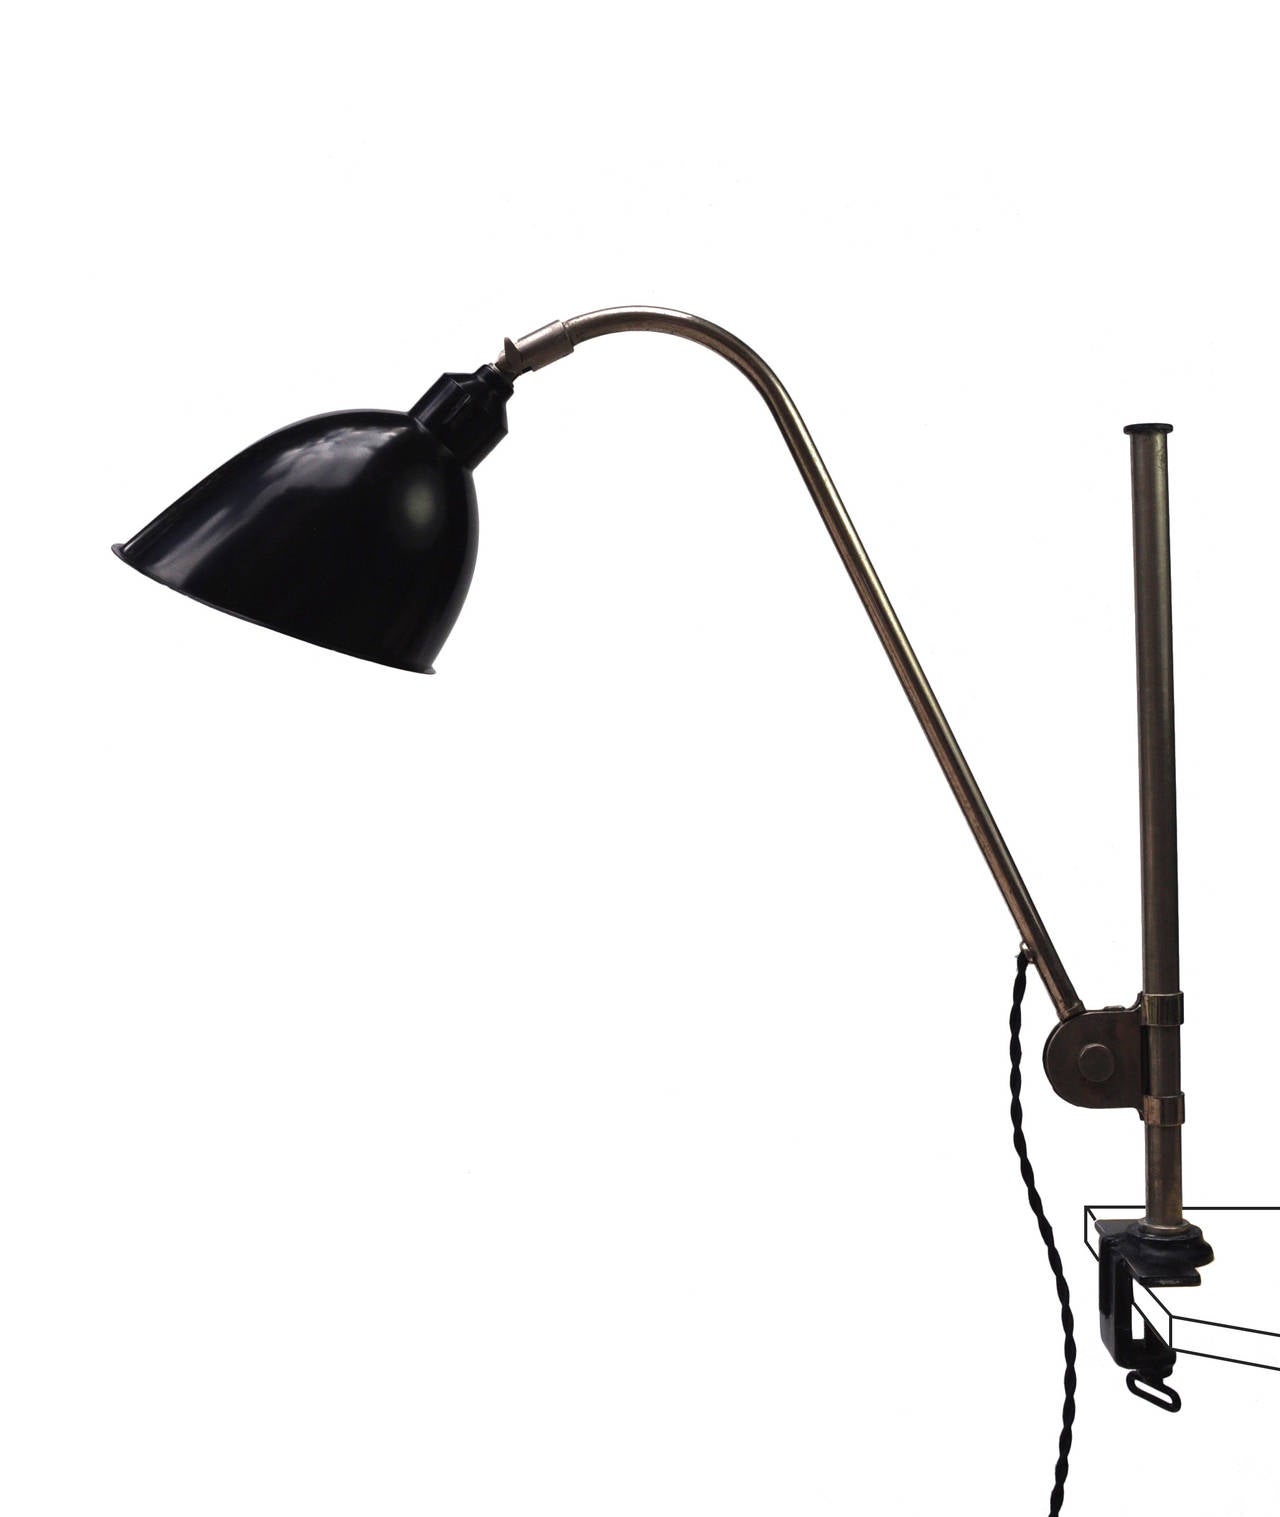 An early to mid-1930s Belmag edition clamp lamp. The model is tightly associated with the Rodella and Frankfurt editions by Christian Dell during the prewar years.
The model offered here is an especially rare edition from the Swiss lighting